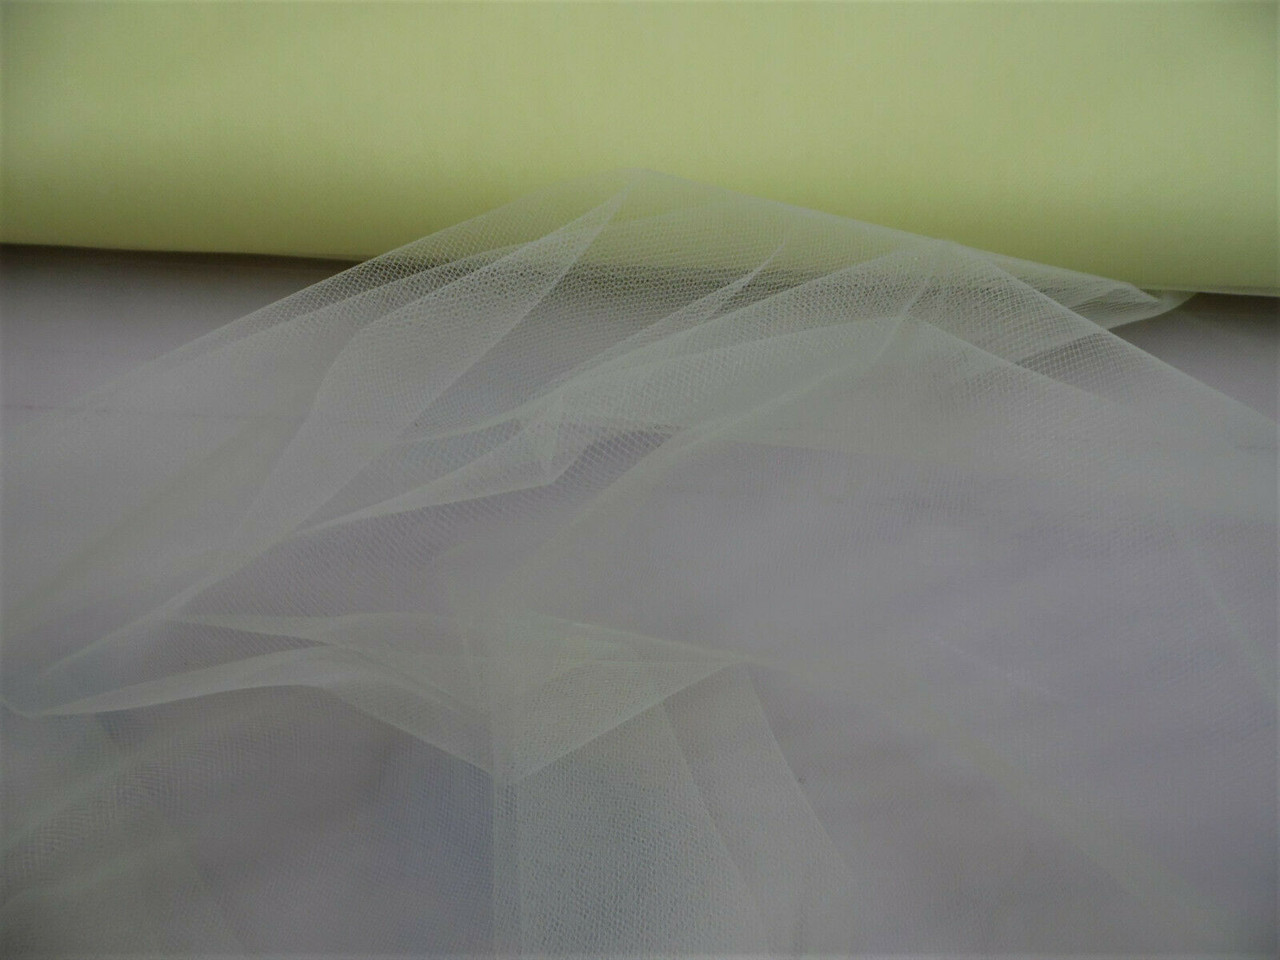 Nylon Tulle Sheer Fabric Pink 54 inch wide DD316